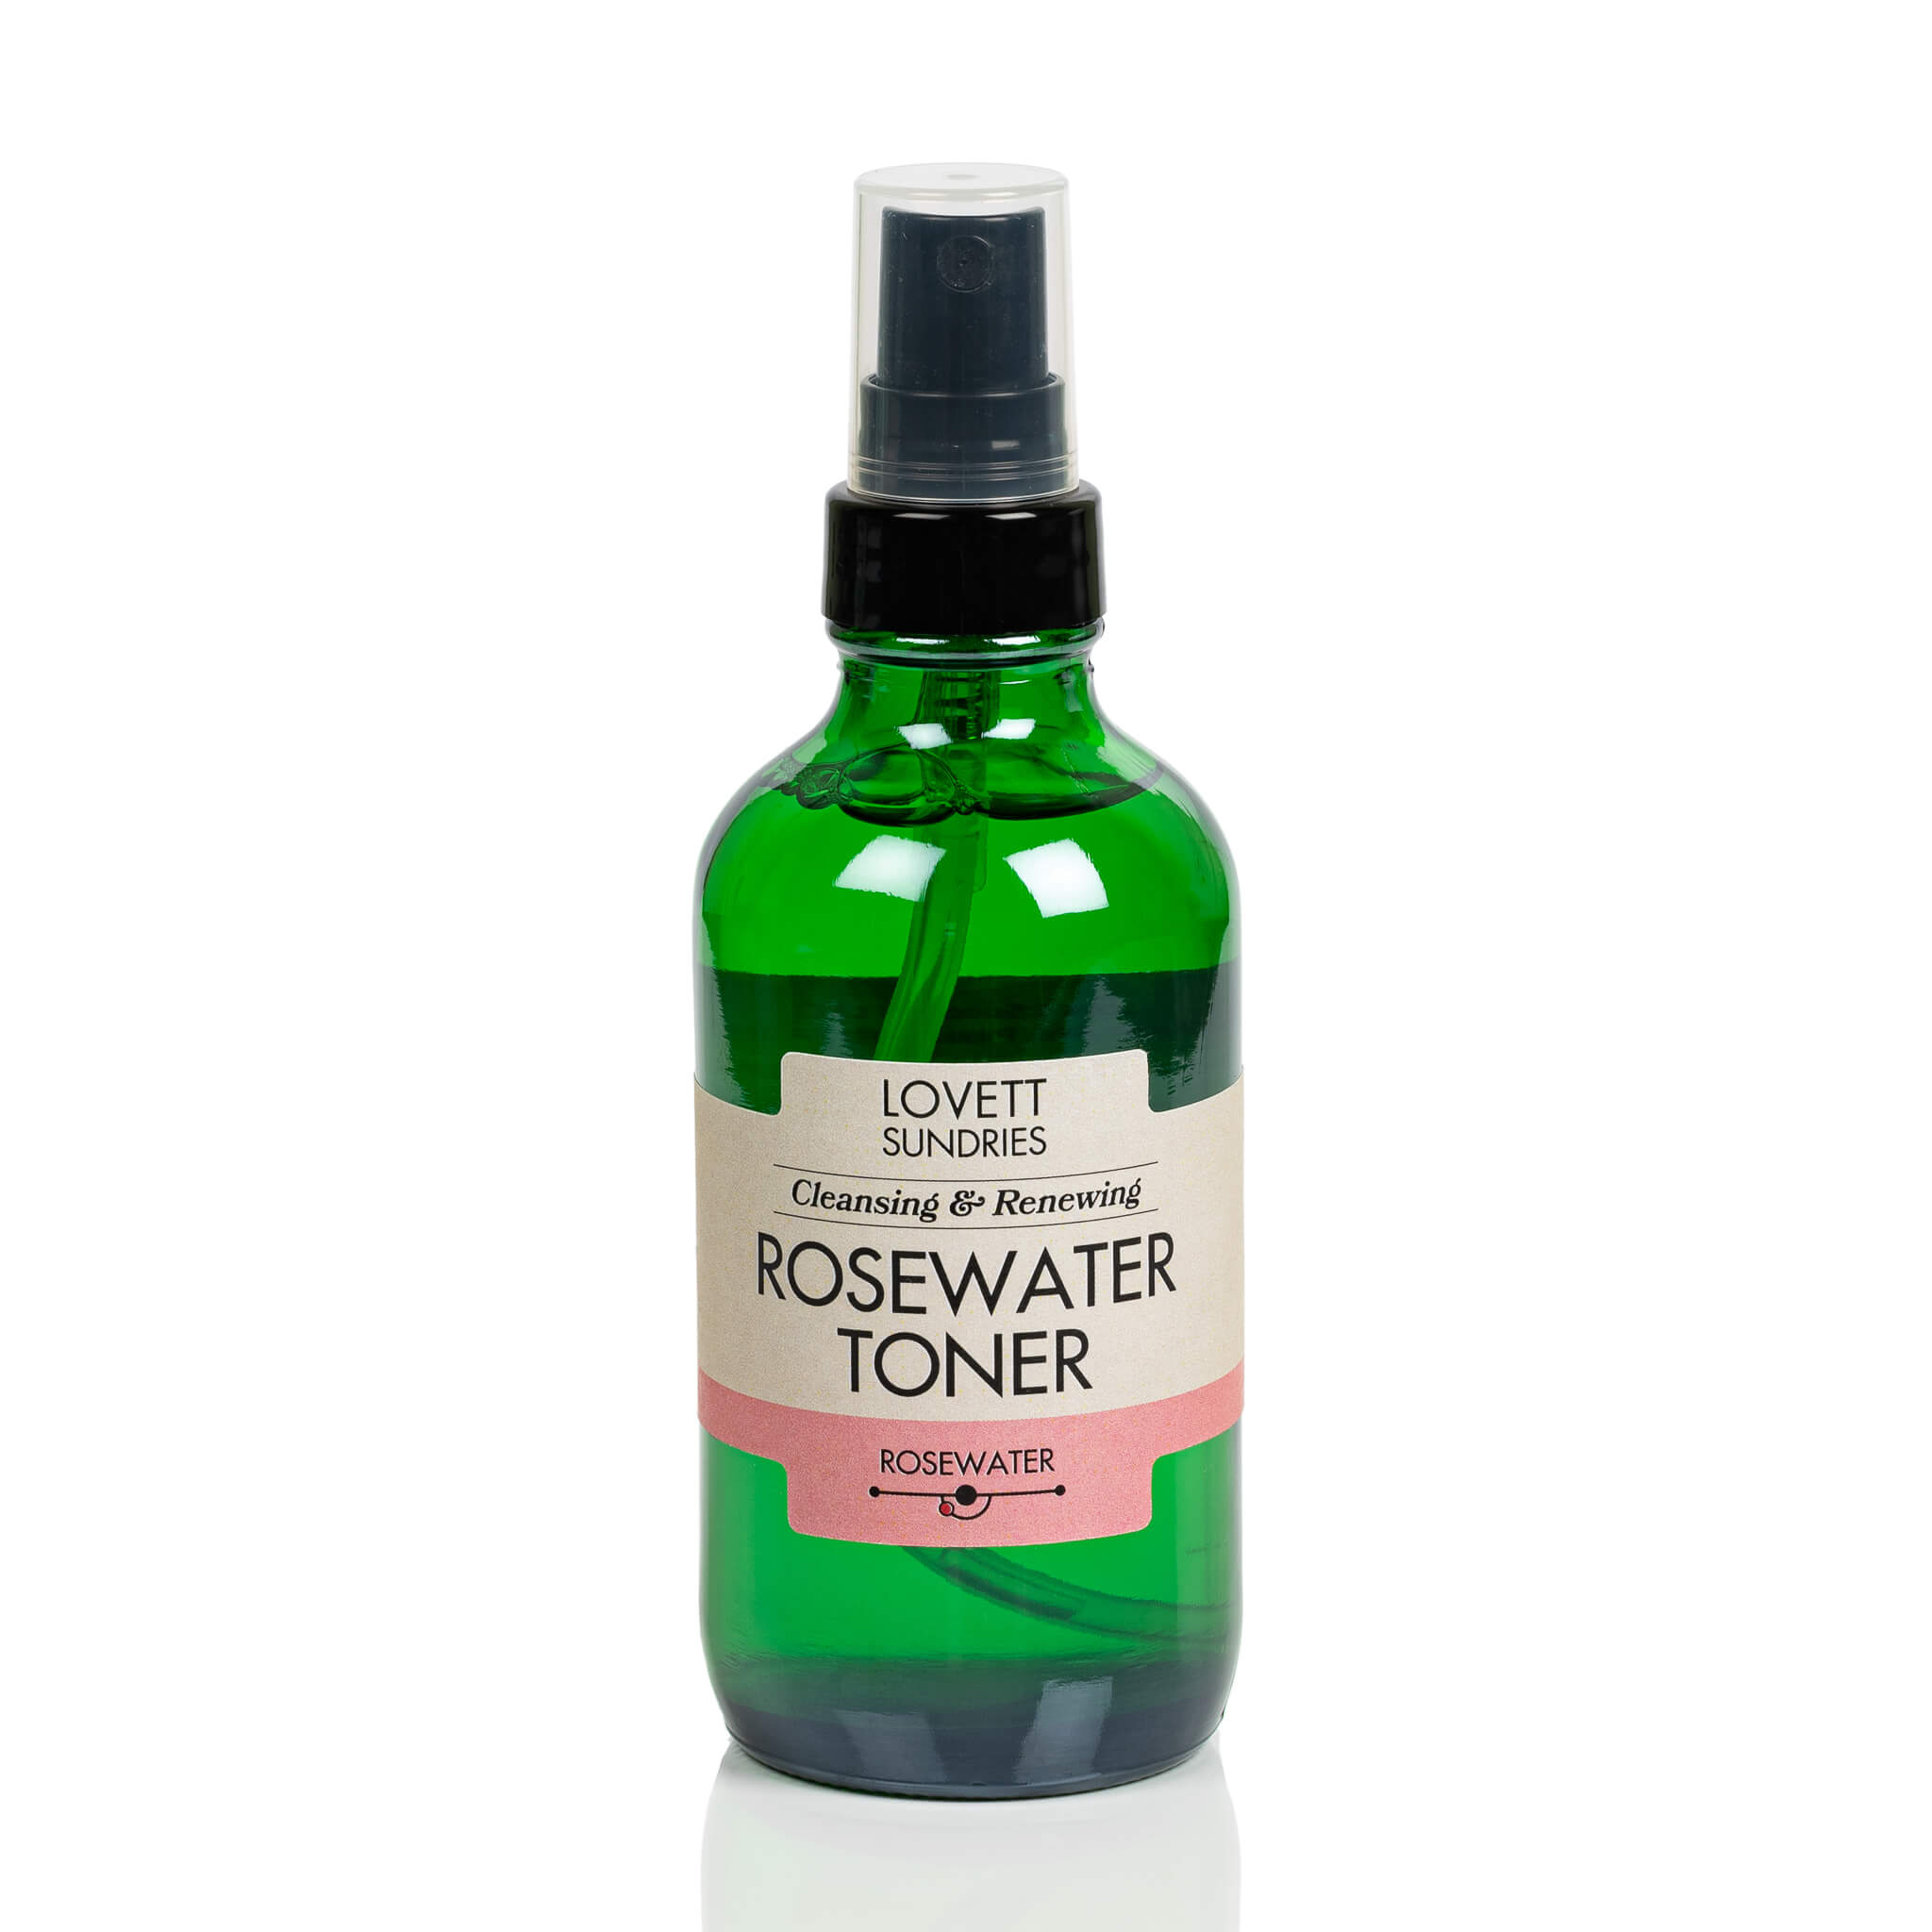 All natural cleansing and renewing rose water toner in a green glass bottle with a spray top. 